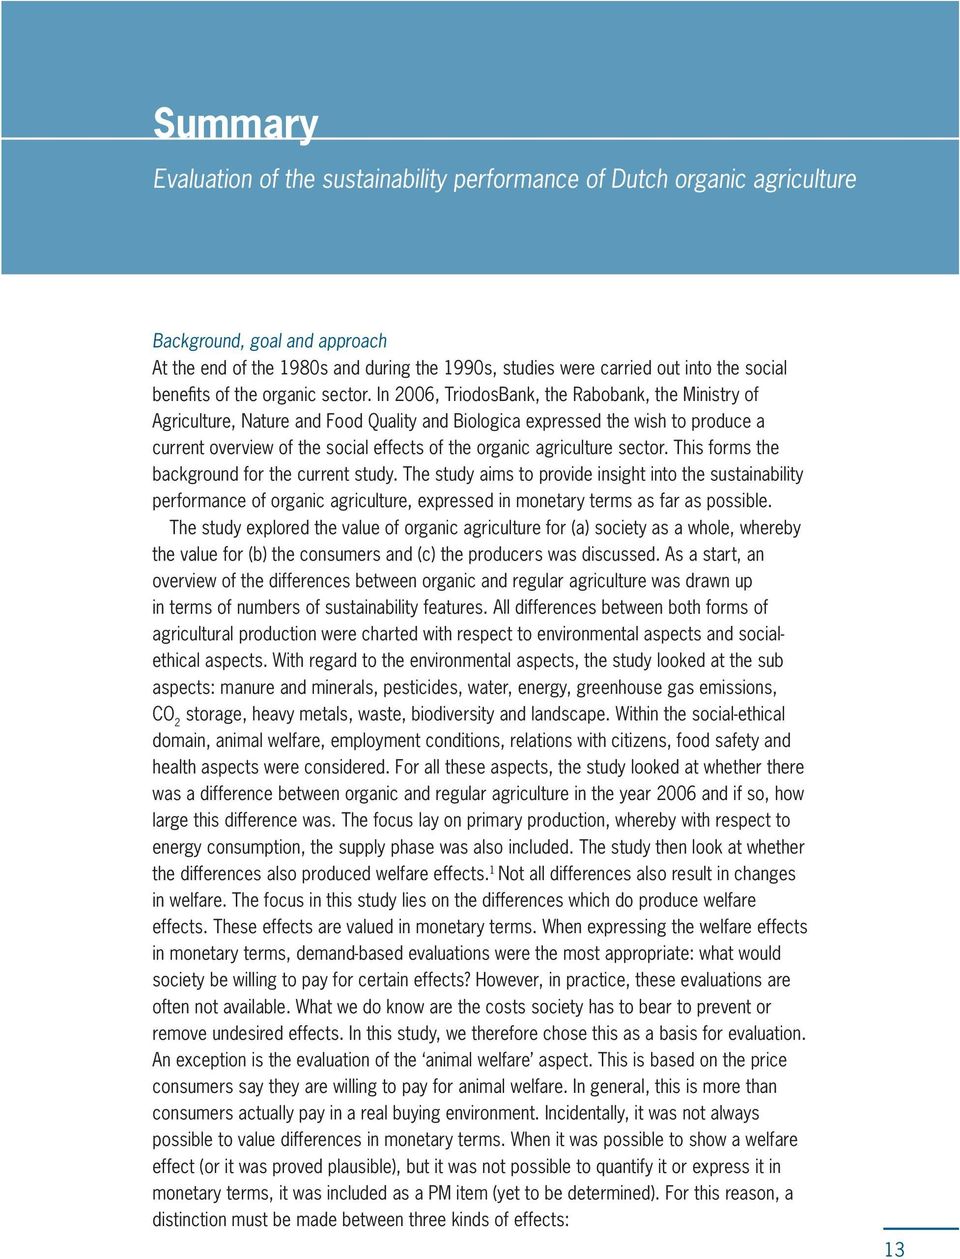 In 2006, TriodosBank, the Rabobank, the Ministry of Agriculture, Nature and Food Quality and Biologica expressed the wish to produce a current overview of the social effects of the organic